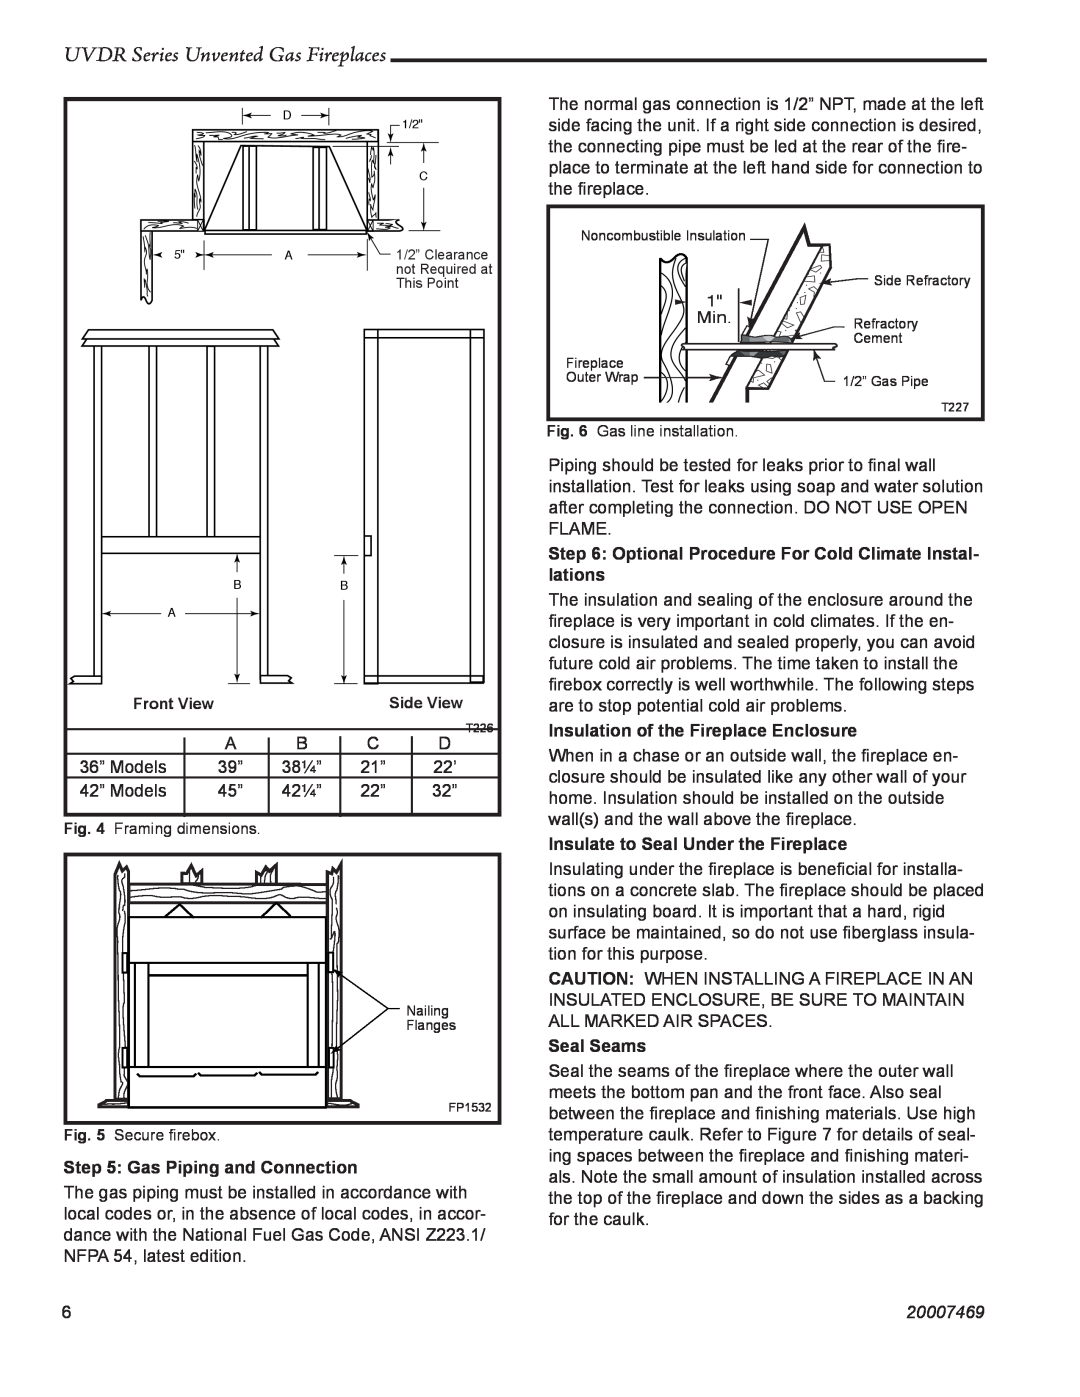 CFM Corporation UVDR42C, UVDR36C Gas Piping and Connection, Insulation of the Fireplace Enclosure, Seal Seams, 20007469 